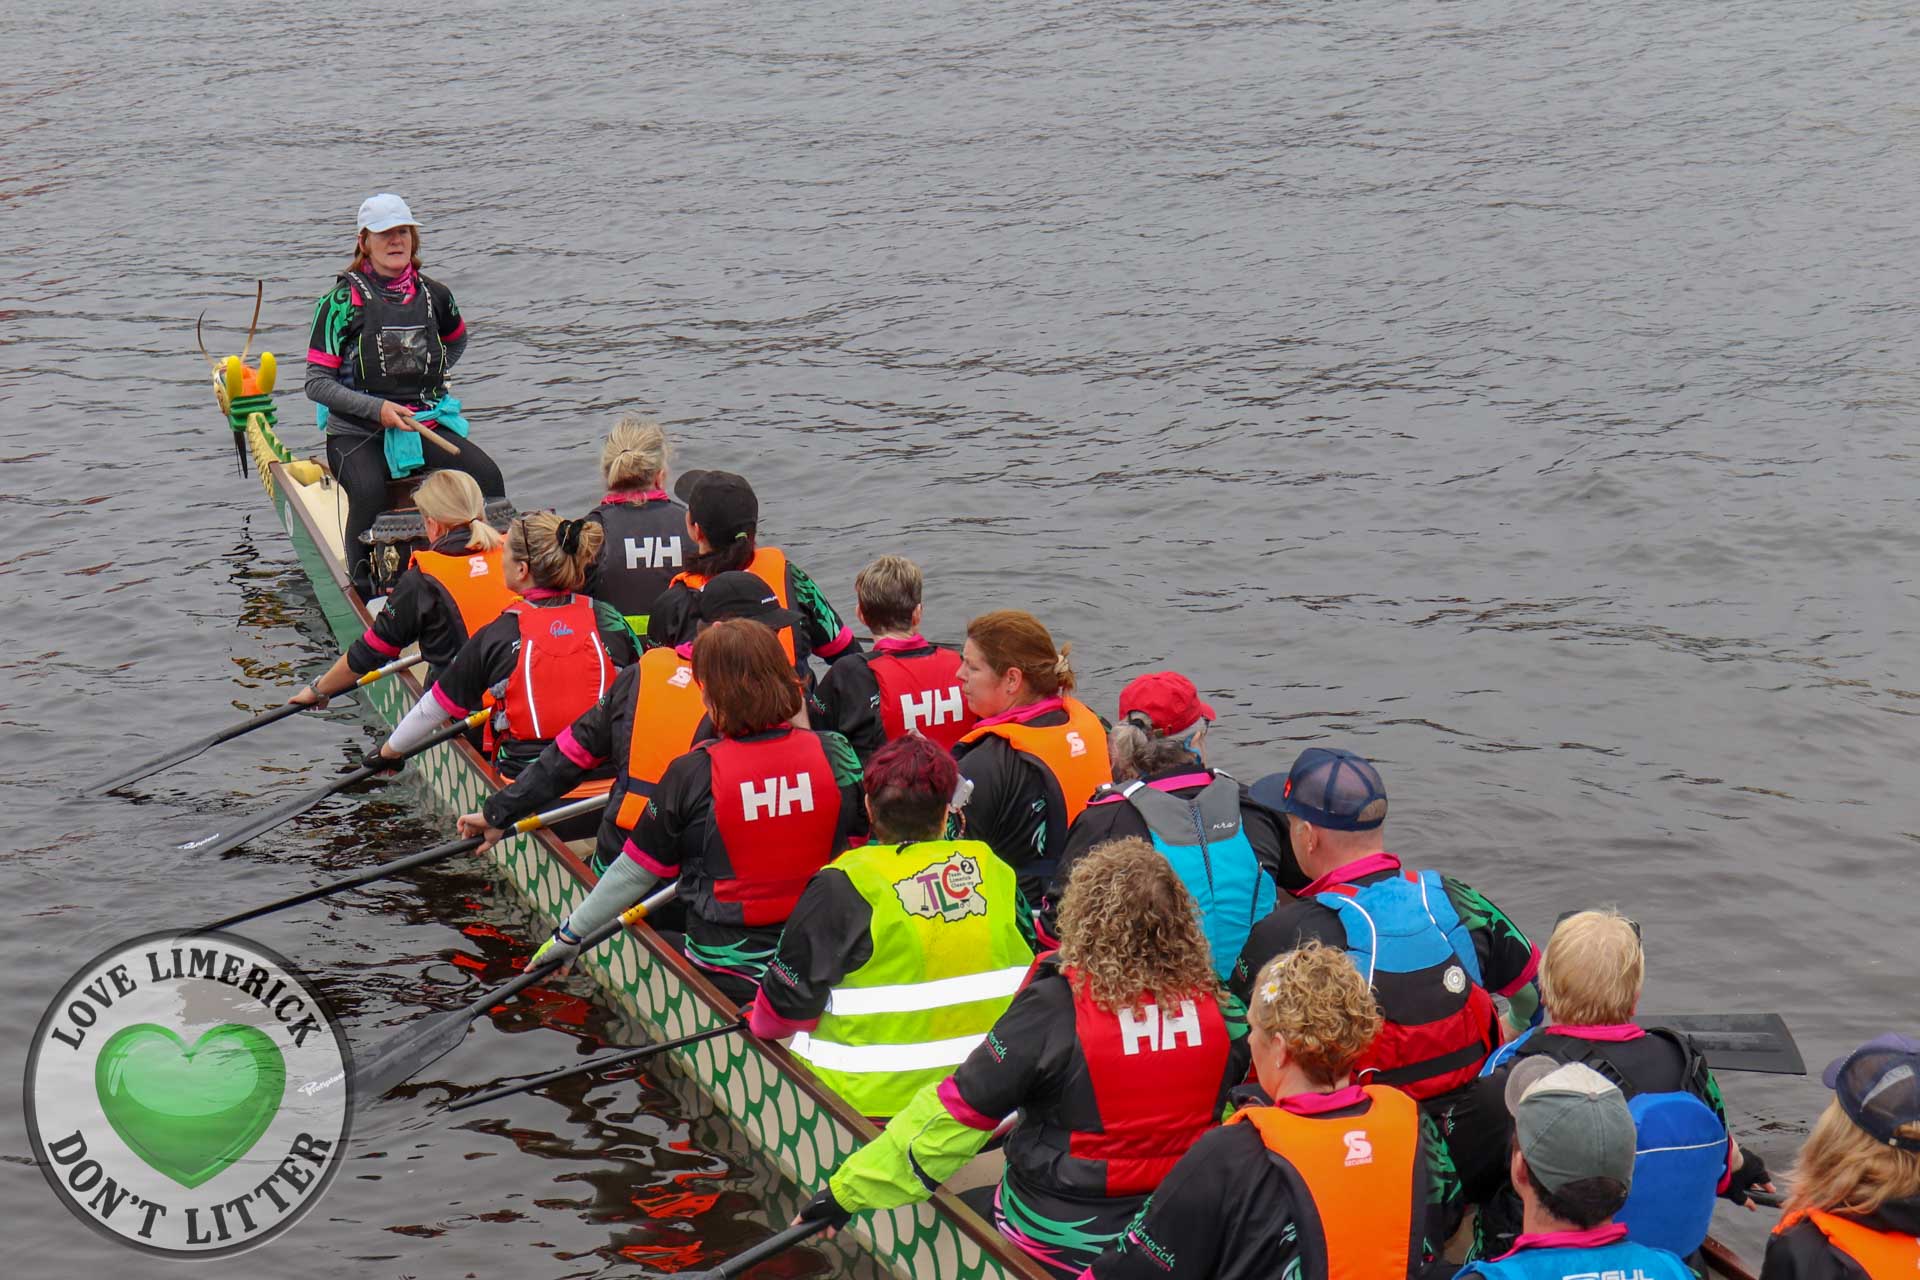 Limerick Dragons Voyage - a group of breast cancer survivors sailed across the River Shannon last Saturday, April 30 to celebrate Limerick’s 1100th birthday as part of Riverfest. Picture: Ava O Donoghue/ilovelimerick